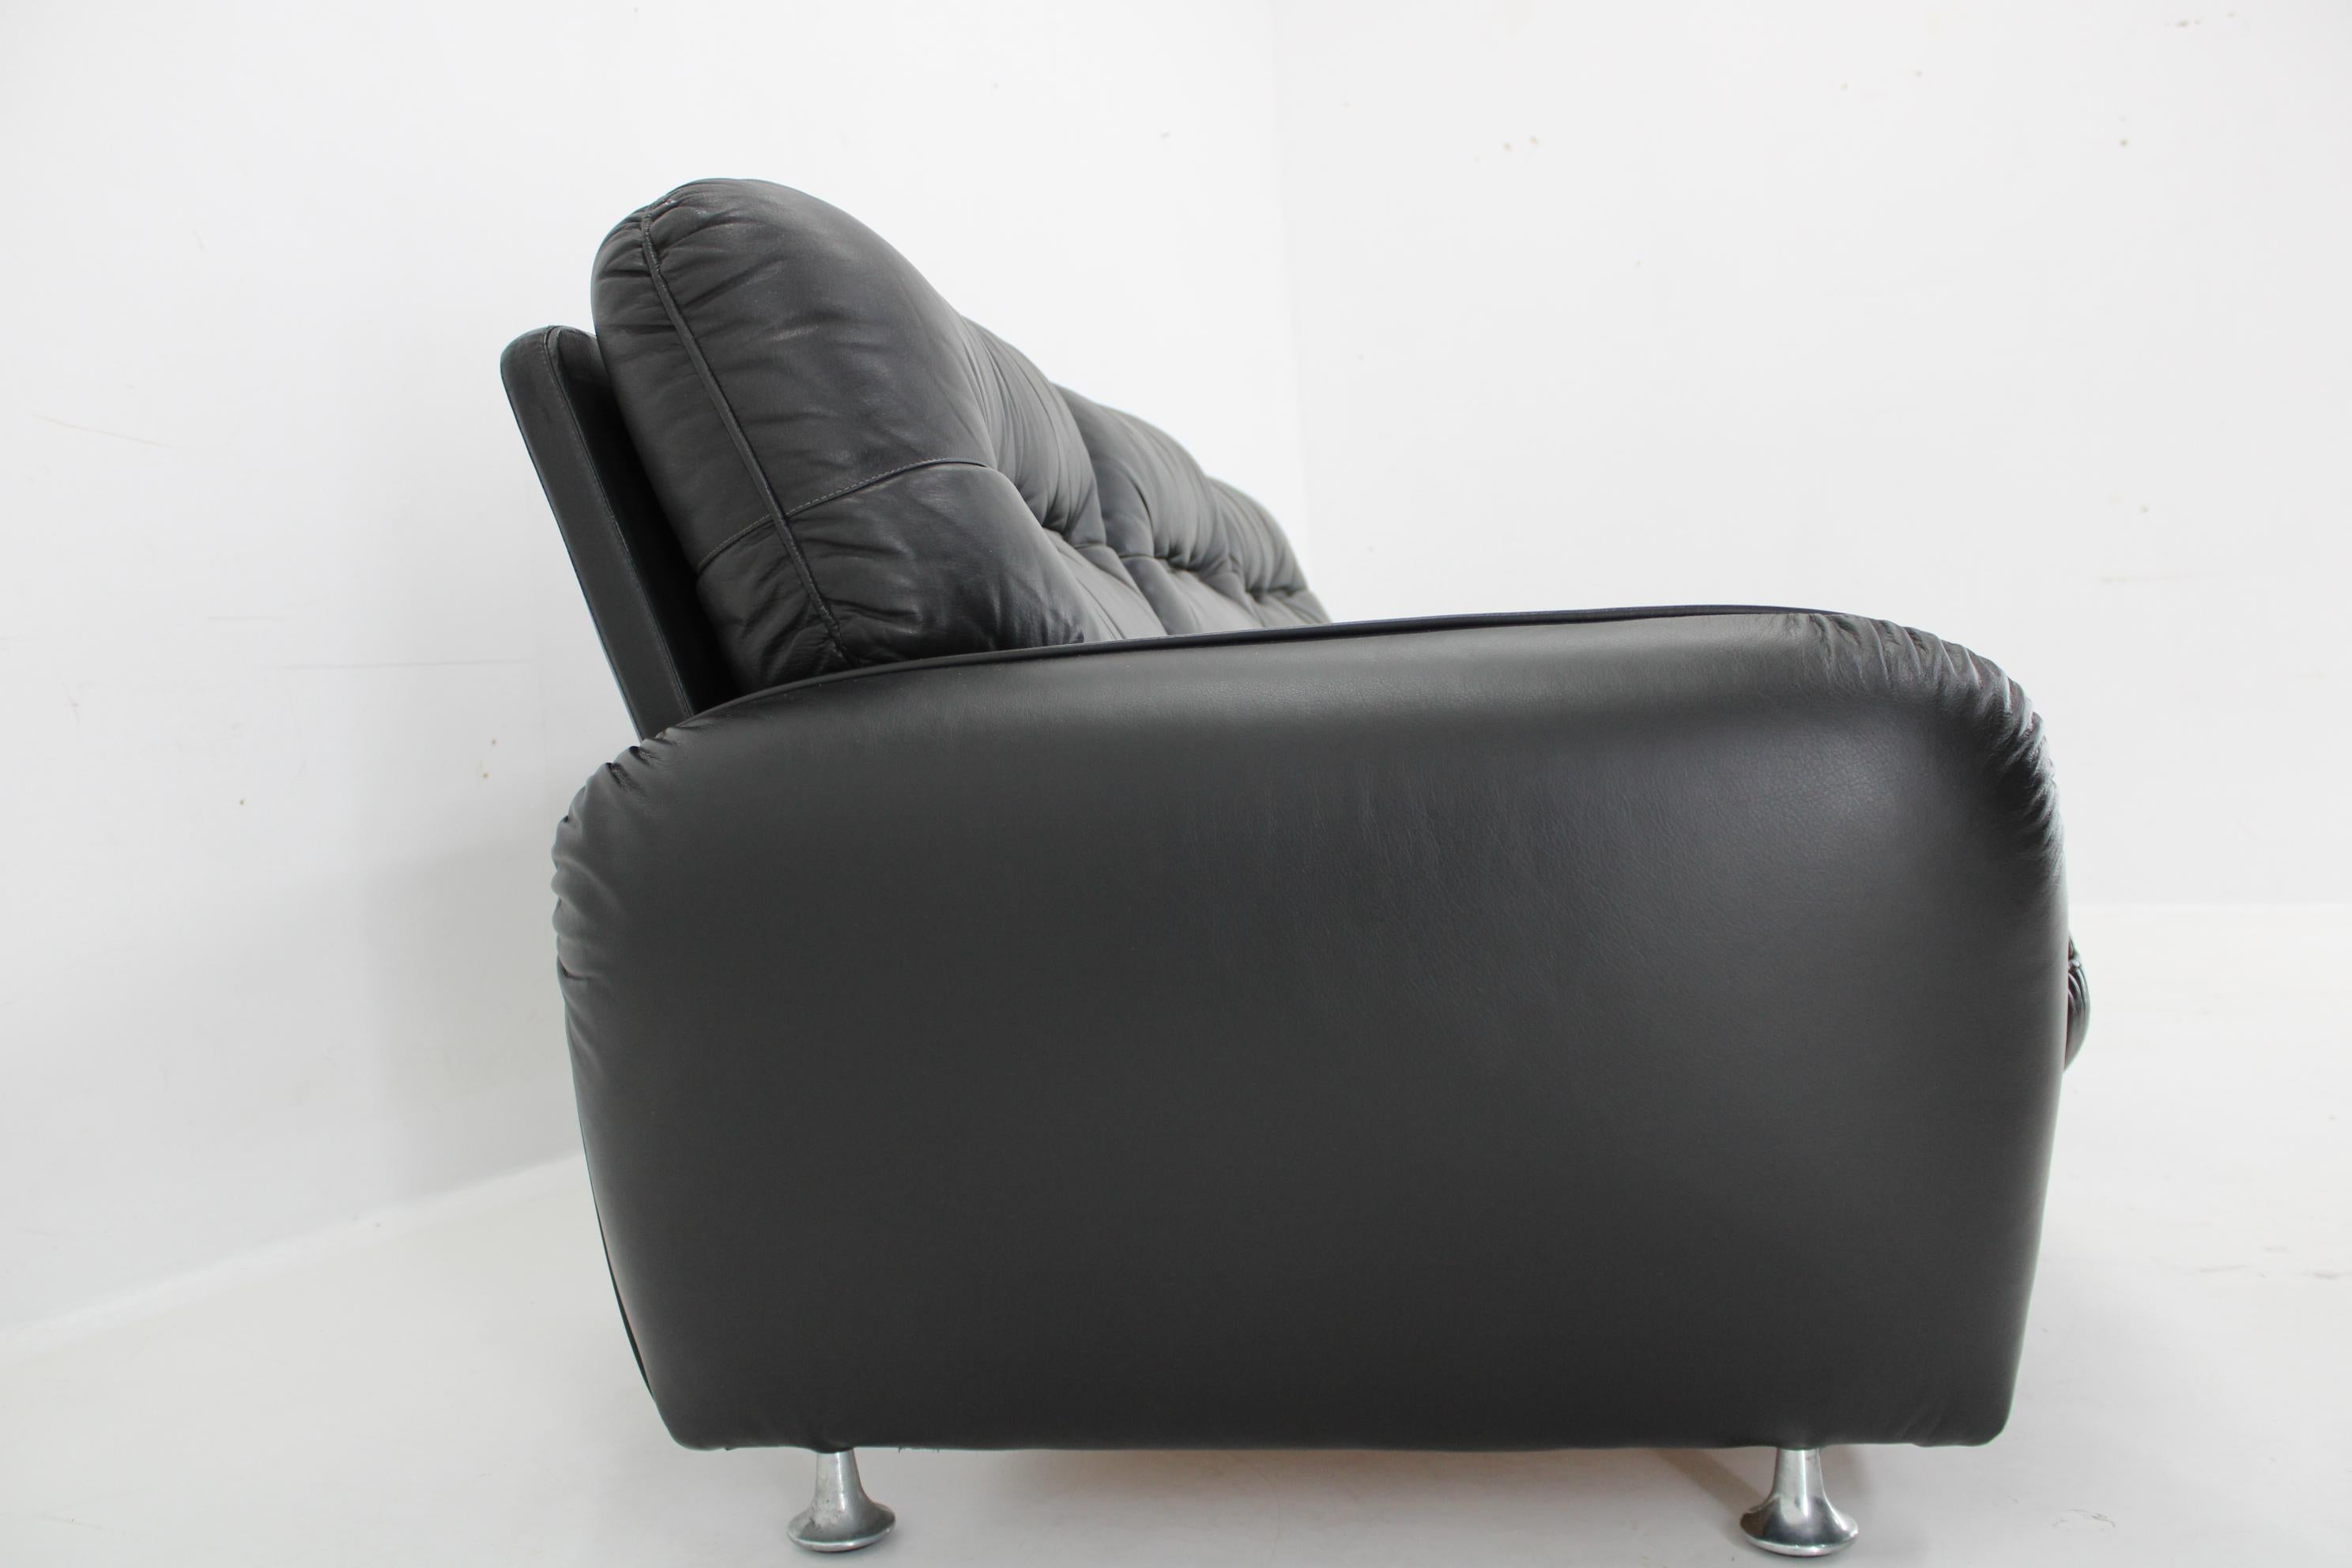 1970s 3-Seater Sofa in Black Leather, Italy For Sale 2